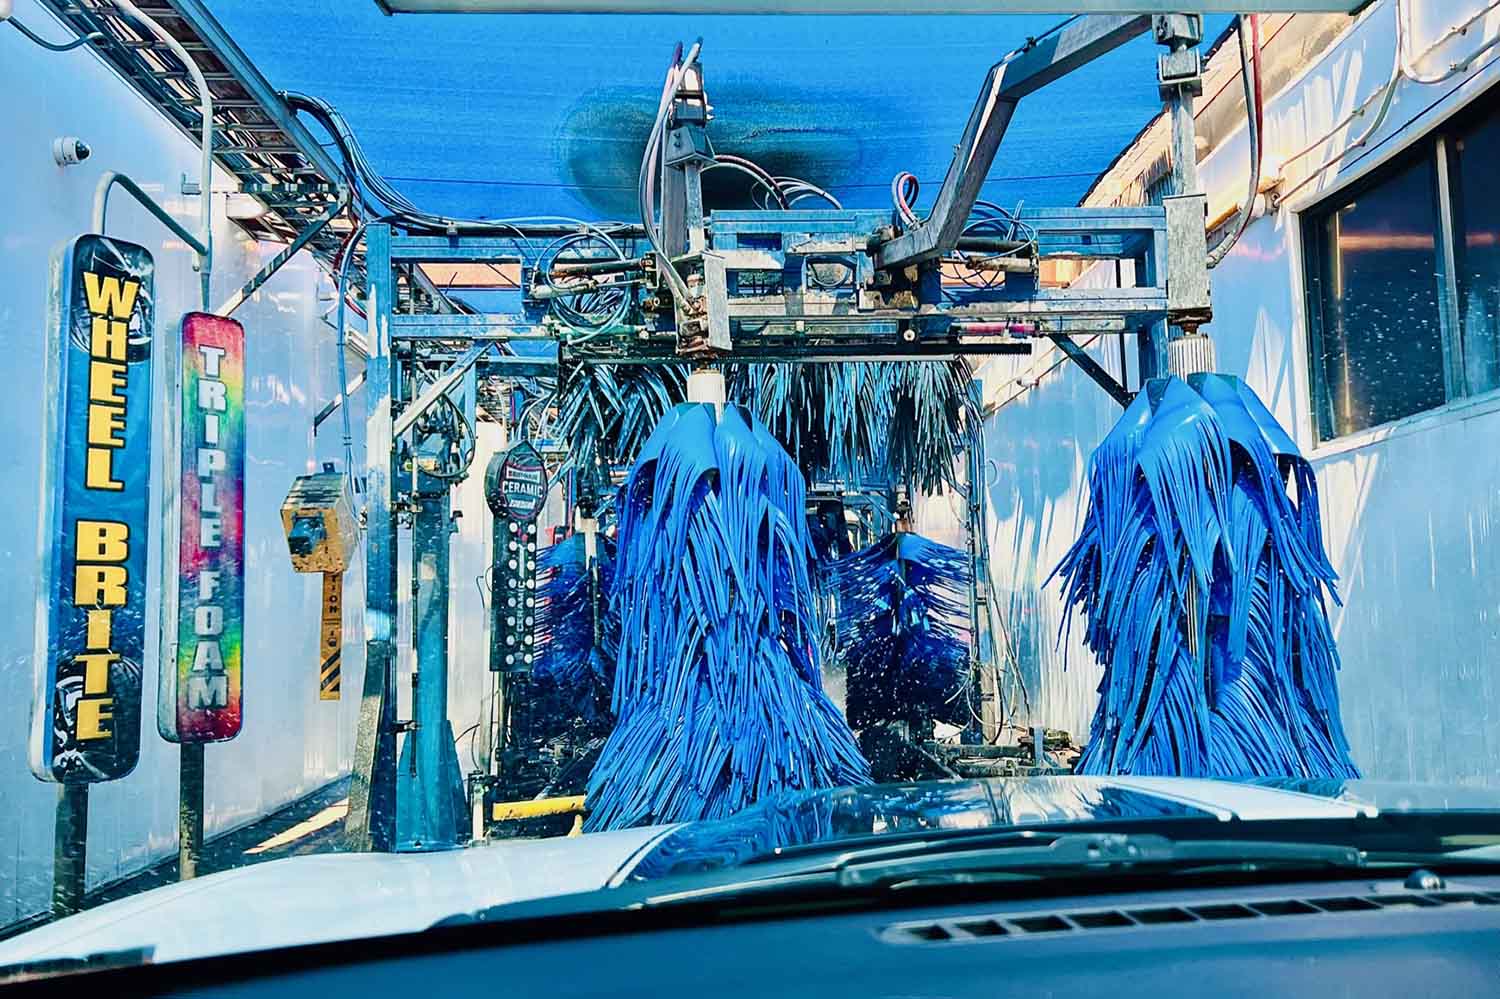 A series of tall brushes inside an automated car wash